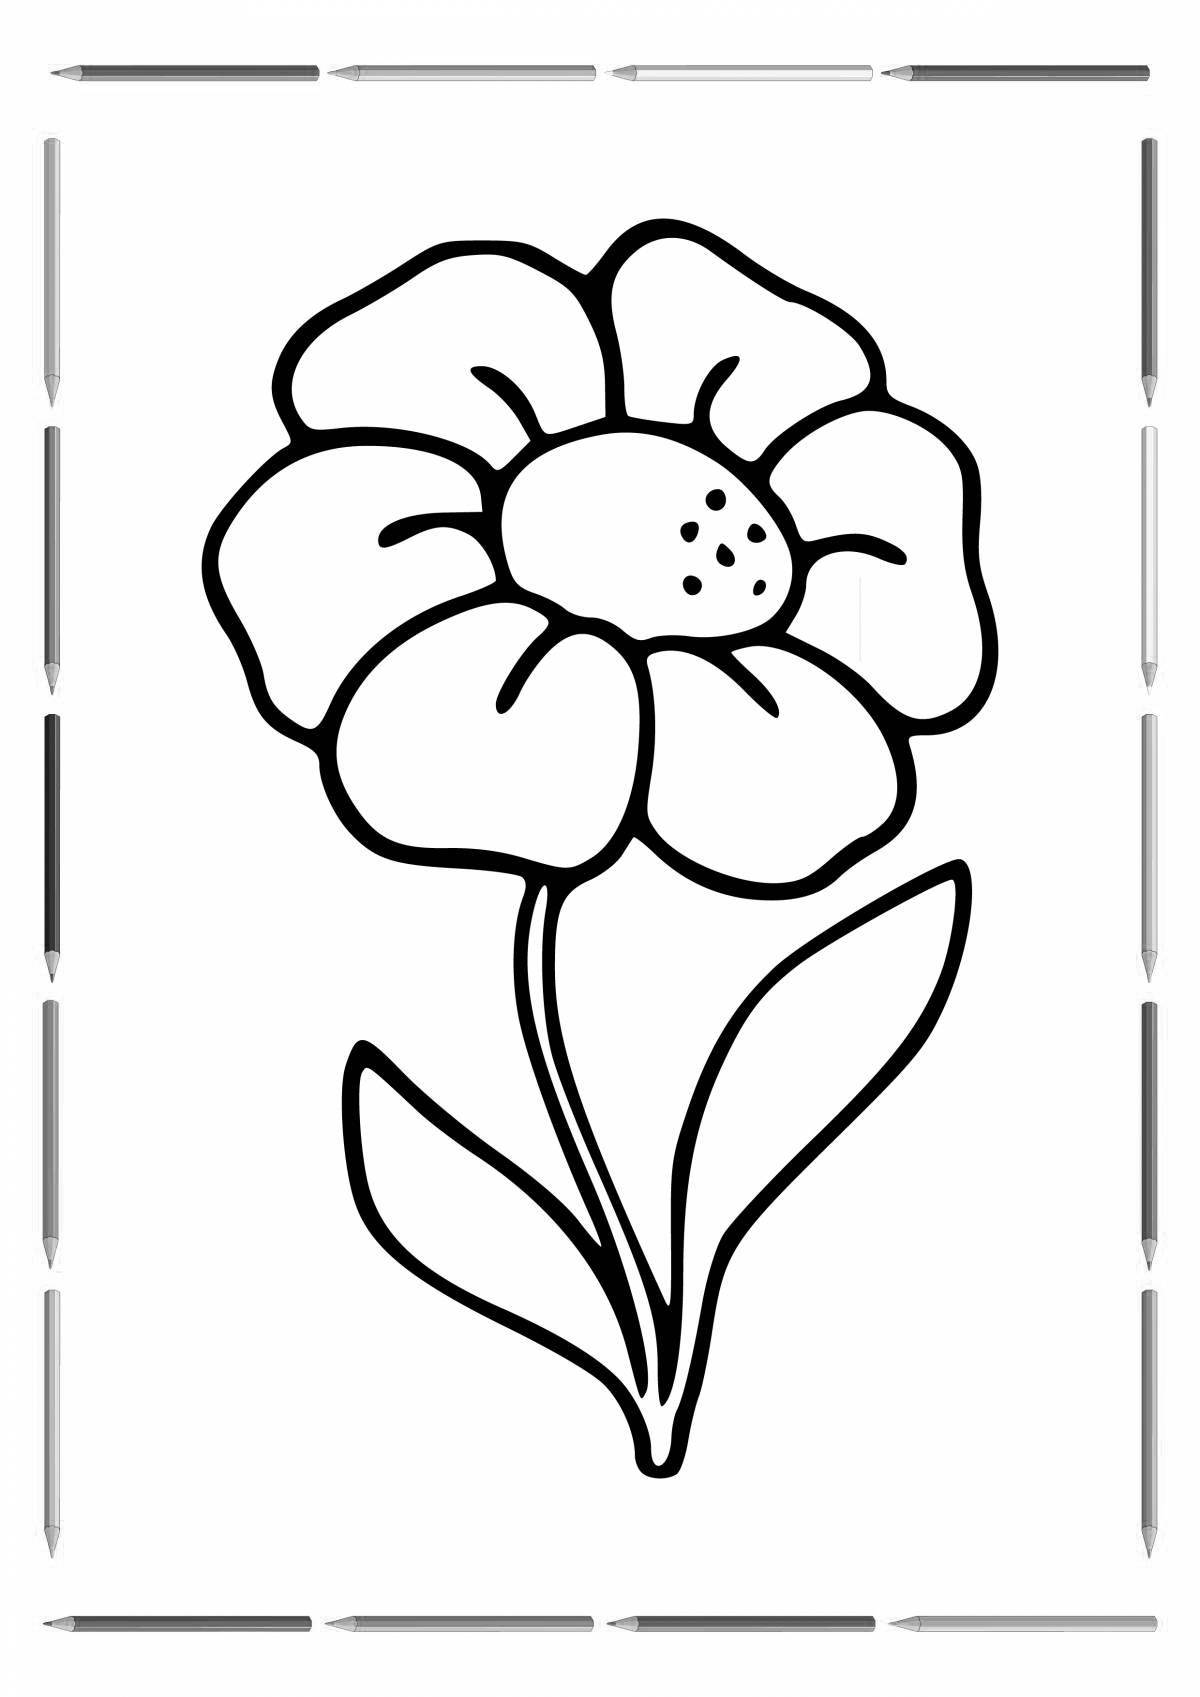 Flower drawing for kids #2